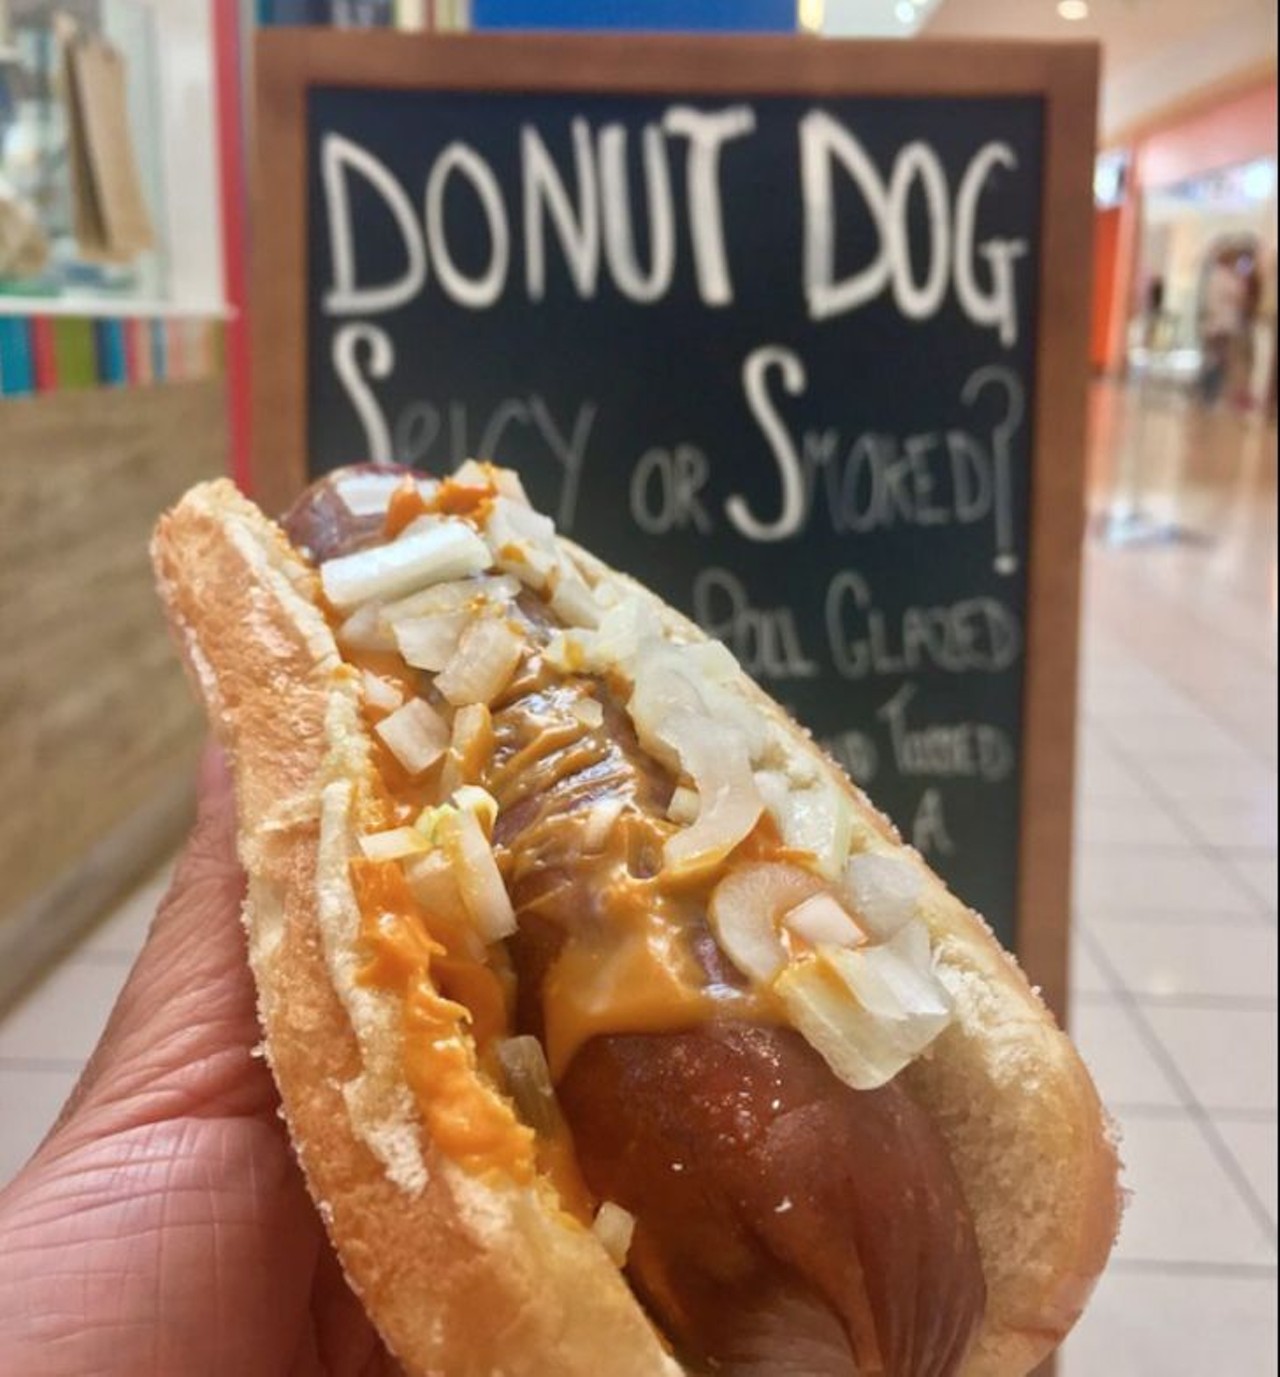 Sausage Shack: Donut Dog  
400 W. New England Ave., Winter Park, 407-576-9552
Sweet and savory collide at the Sausage Shack with their donut dog: smoked Polish kielbasa set in a hot dog bun that&#146;s glazed with butter and tossed in sugar. This delicacy is topped with sweet relish and sweet hot mustard, then drizzled with cheese sauce.
Photo via Yelp/Abby E.